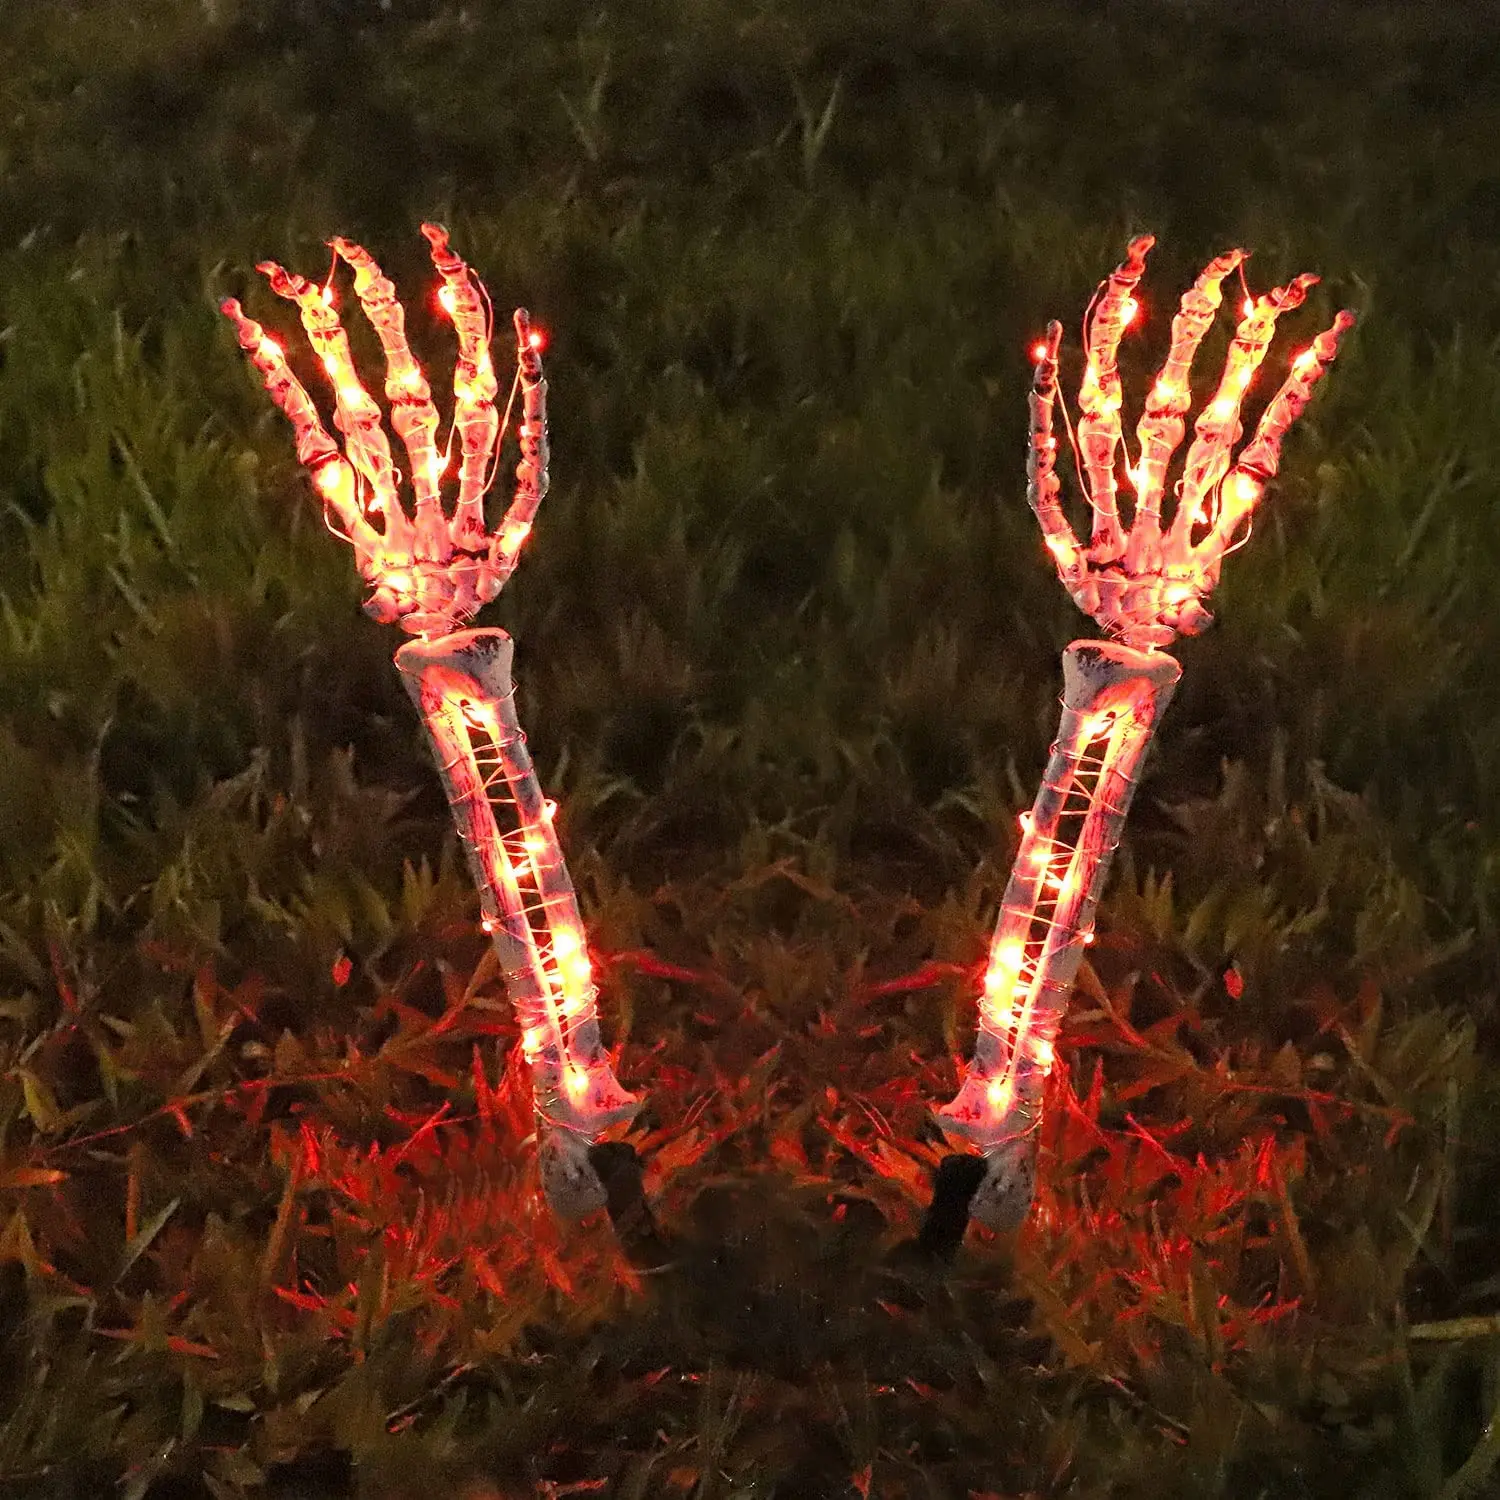 Halloween Decorations Lighted Skeleton Arm Stakes Scary Realistic Hands Bone Waterproof Operated Indoor Outdoor Ornament